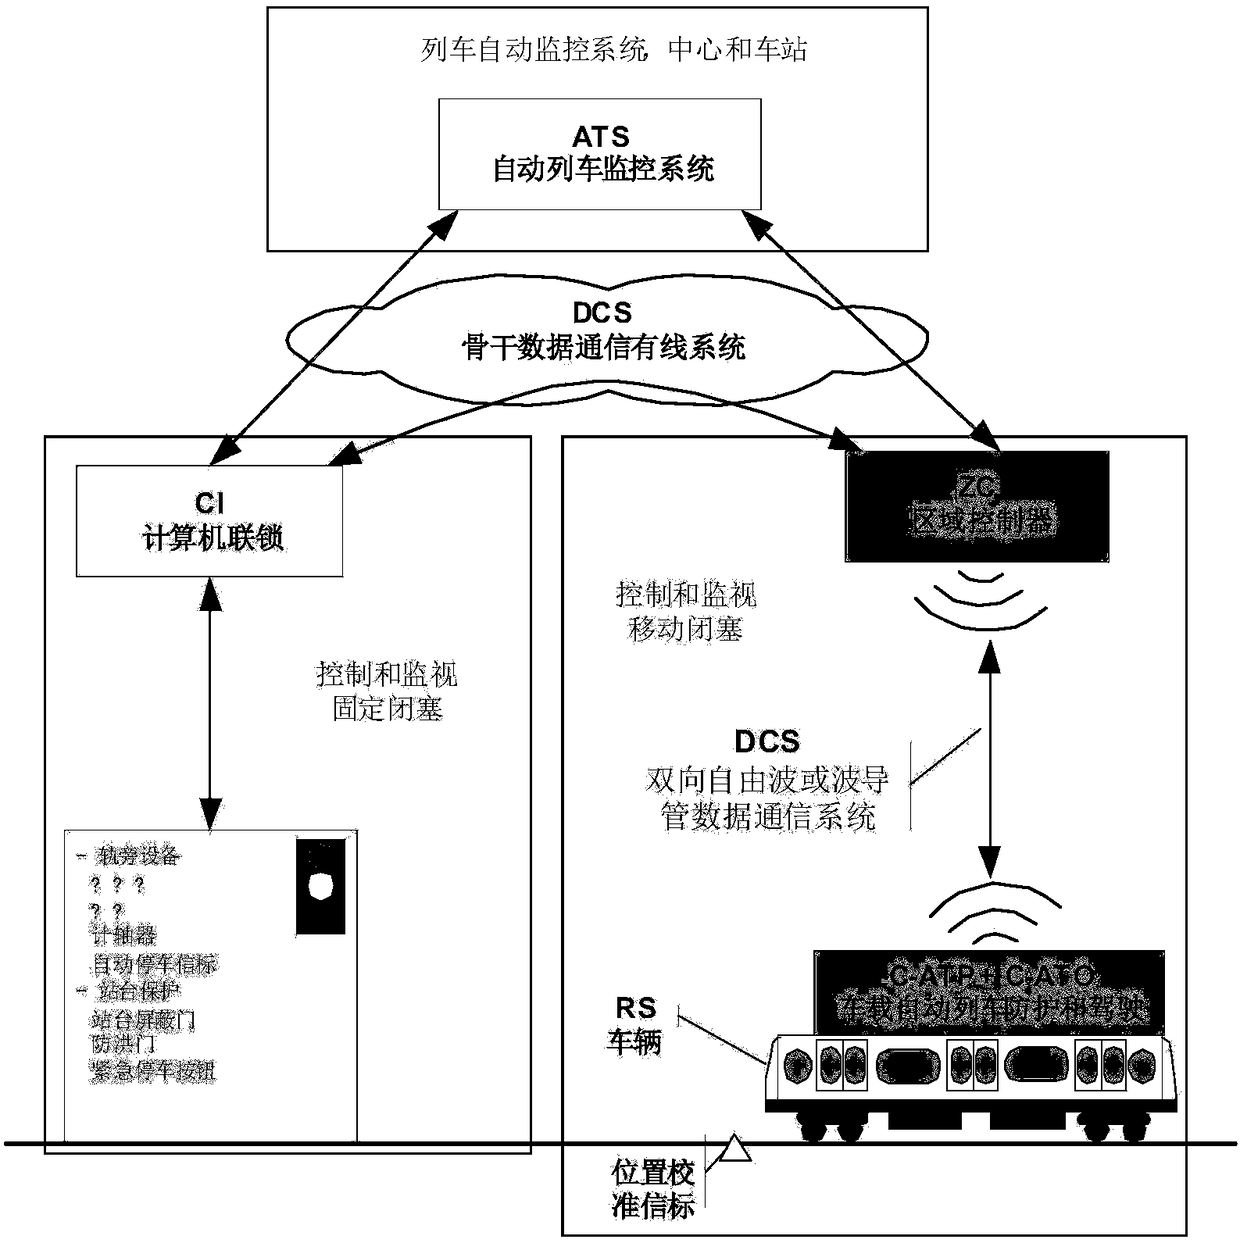 Operation method for coping with tidal passenger flow by adopting communication based train control (CBTC) system